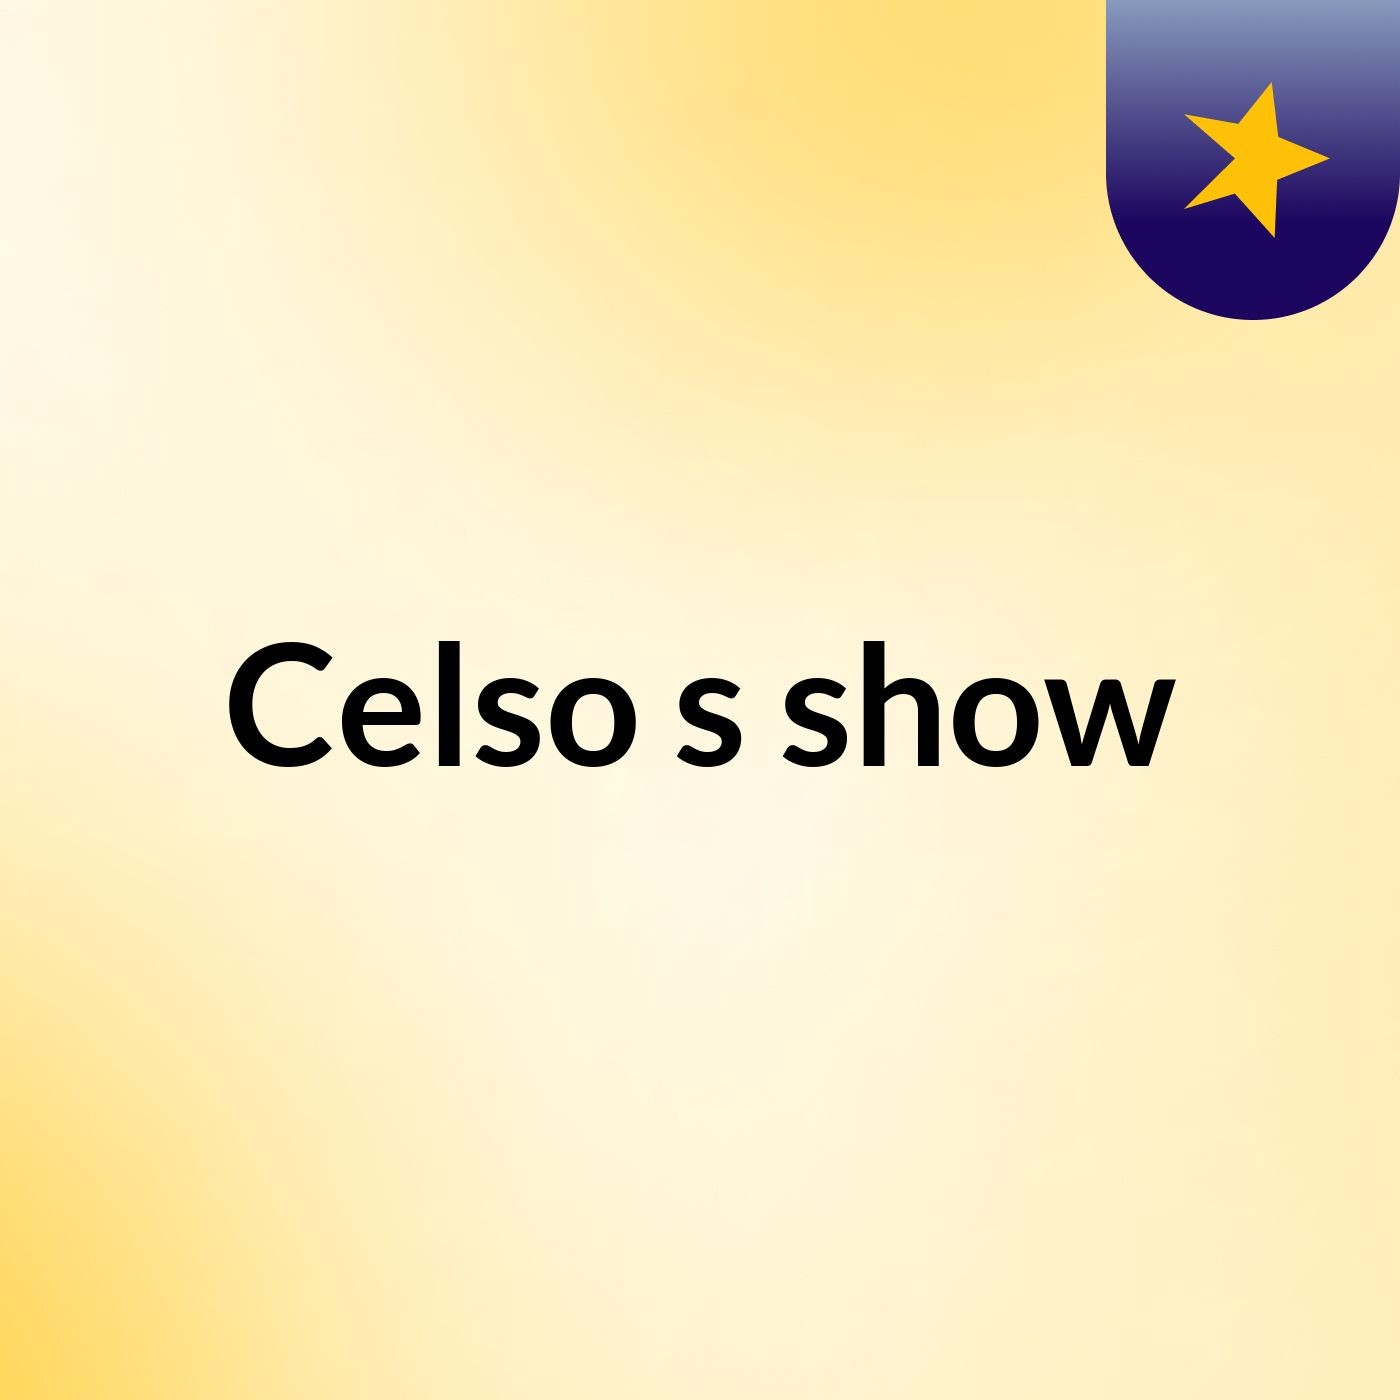 Celso's show